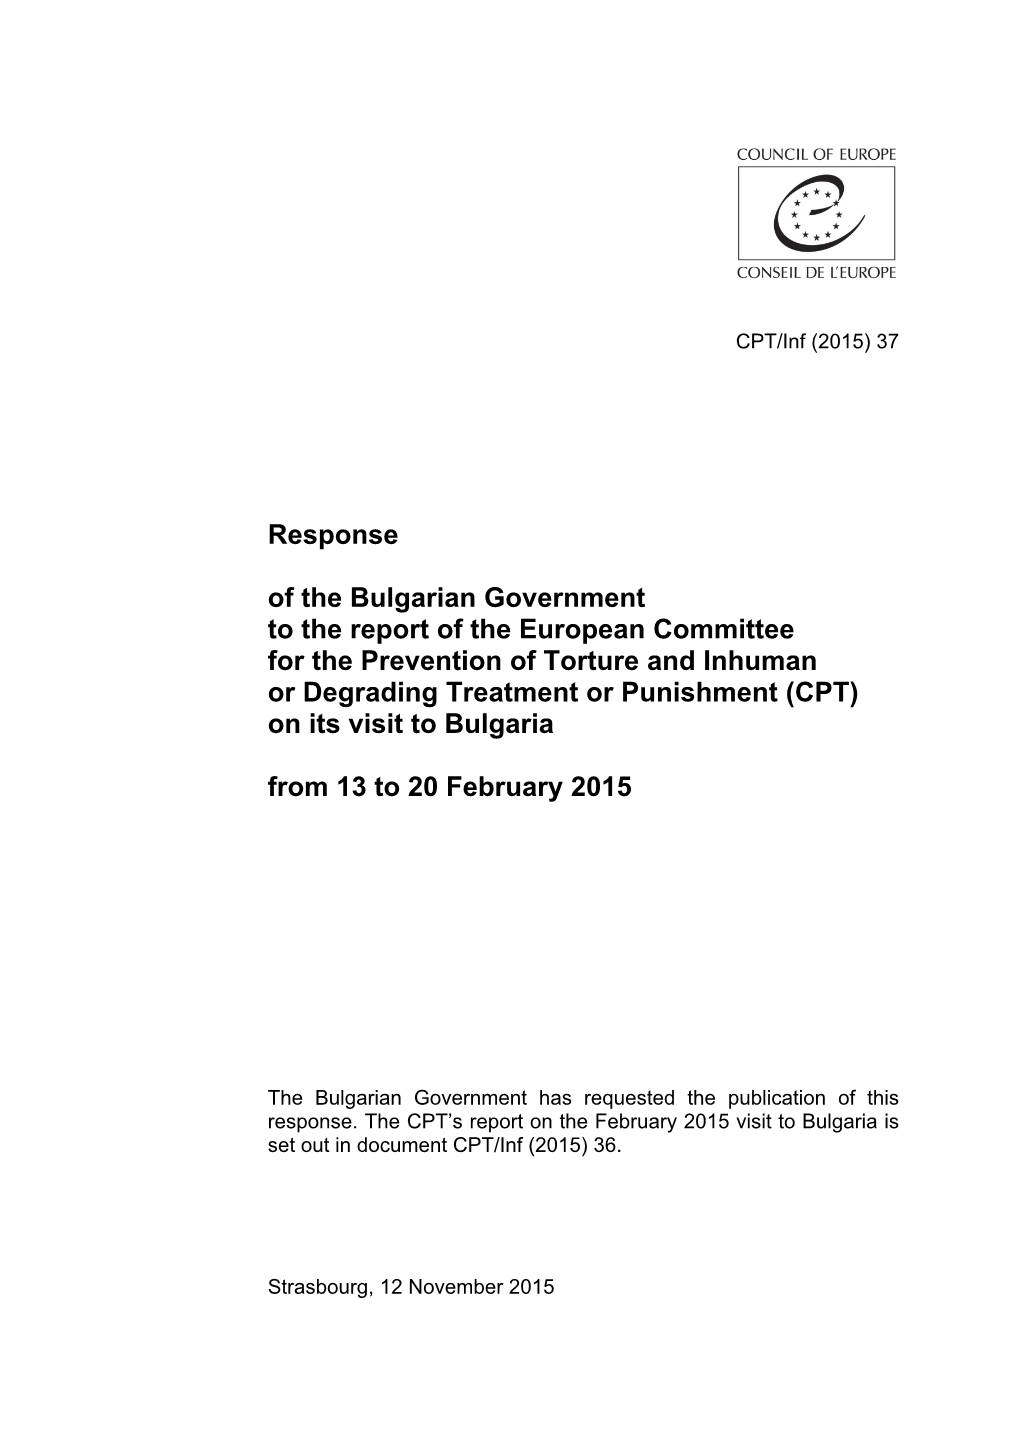 Response of the Bulgarian Government to the Report of the European Committee for the Prevention of Torture and Inhuman Or Degrad